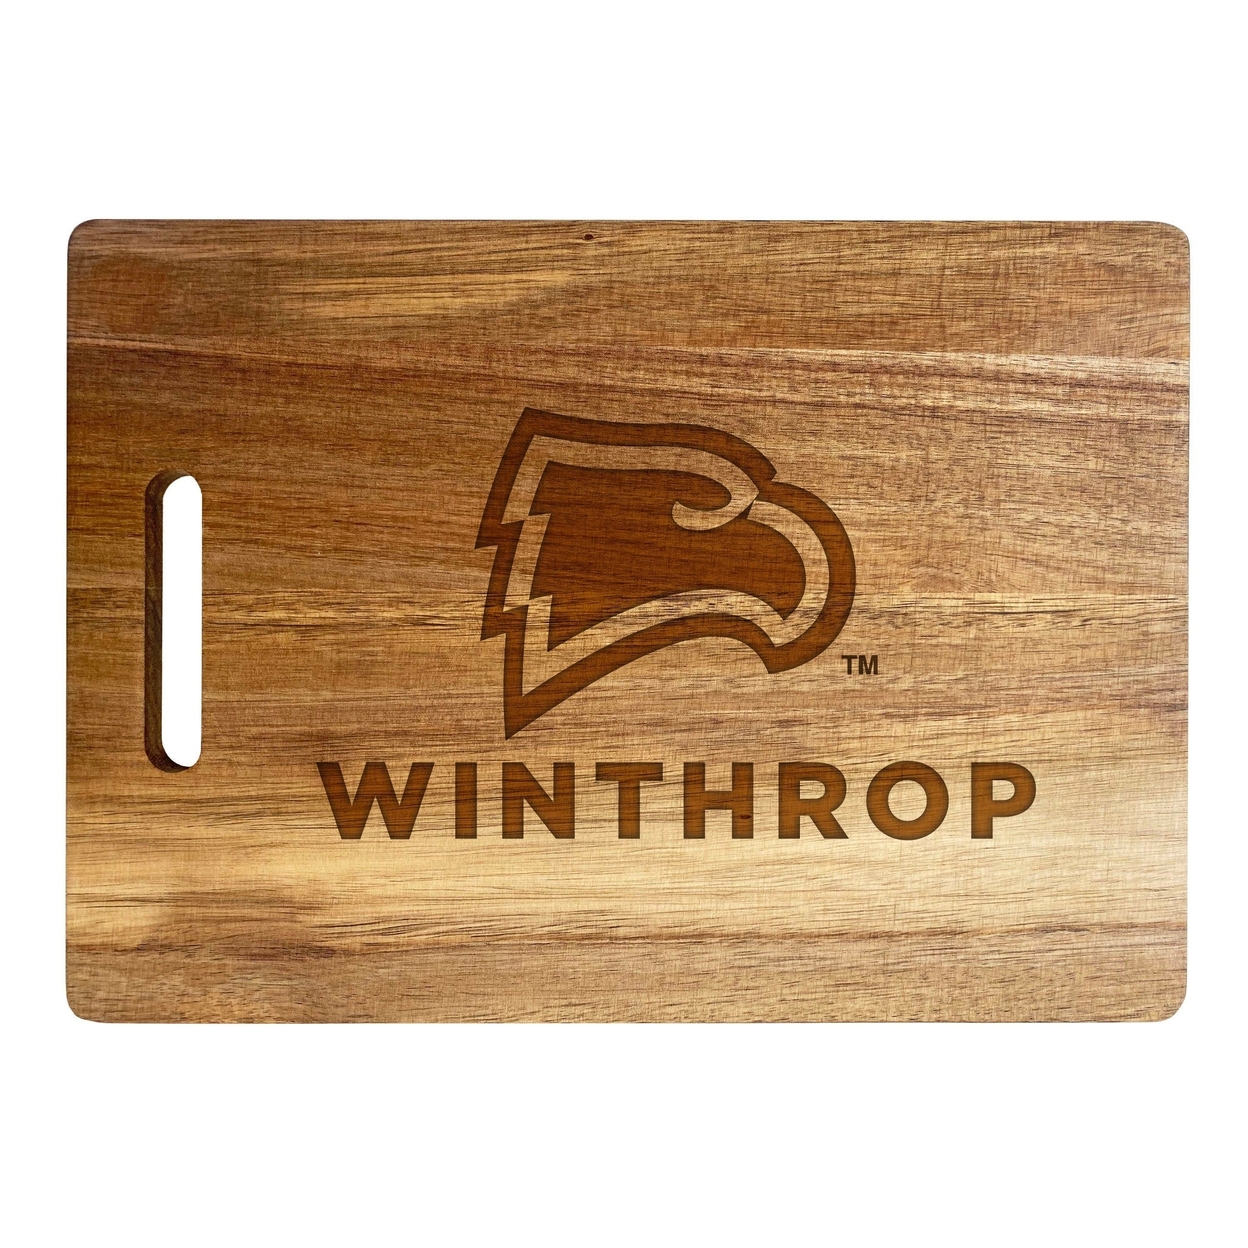 Winthrop University Engraved Wooden Cutting Board 10 X 14 Acacia Wood - Large Engraving